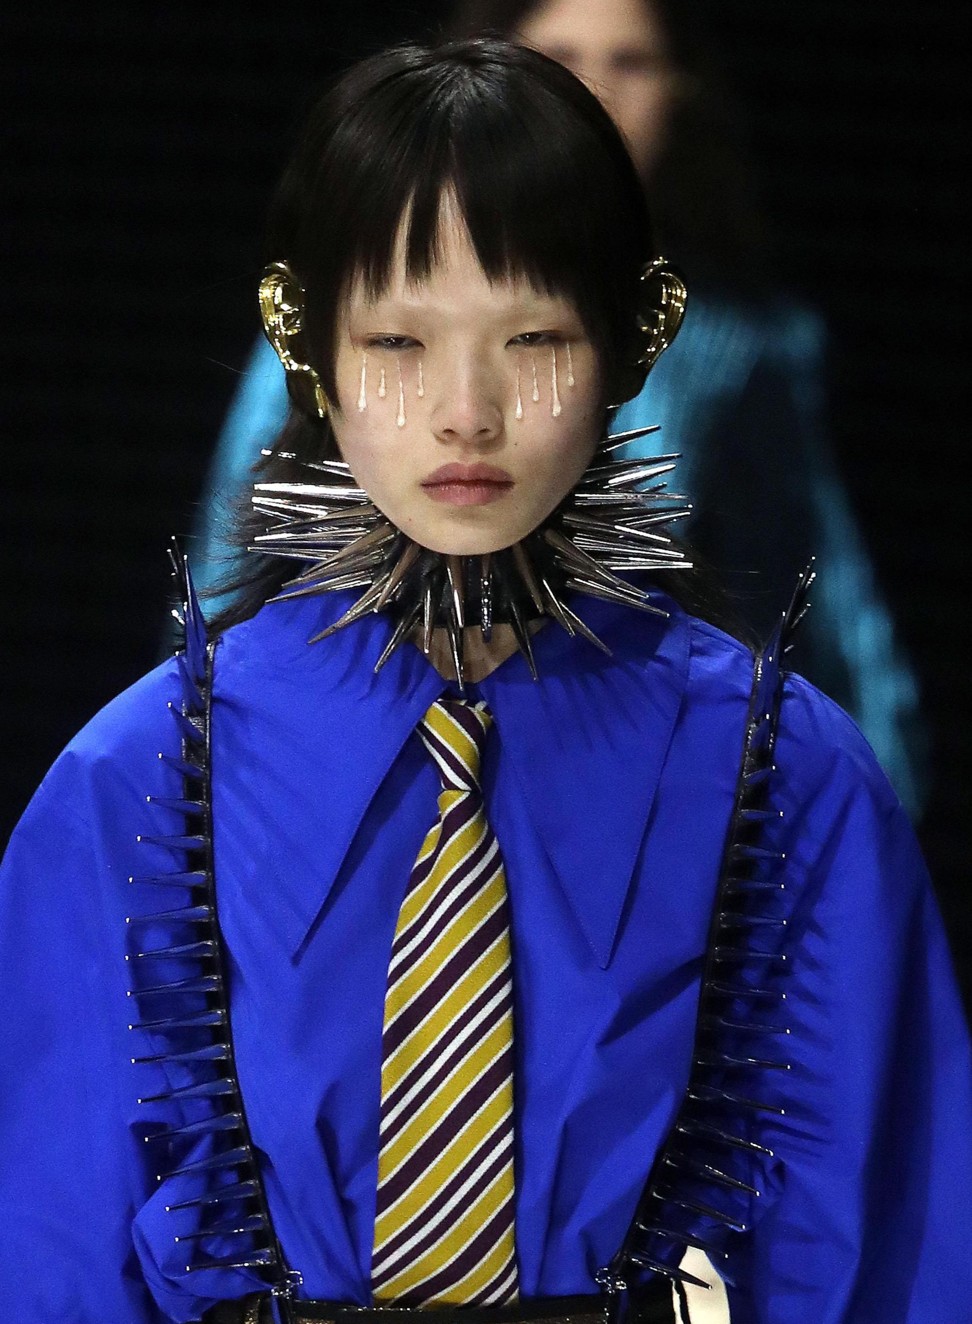 A model presents a creation by Gucci with Pierrot-style tears streaming down her cheeks. Photo: EPA-EFE